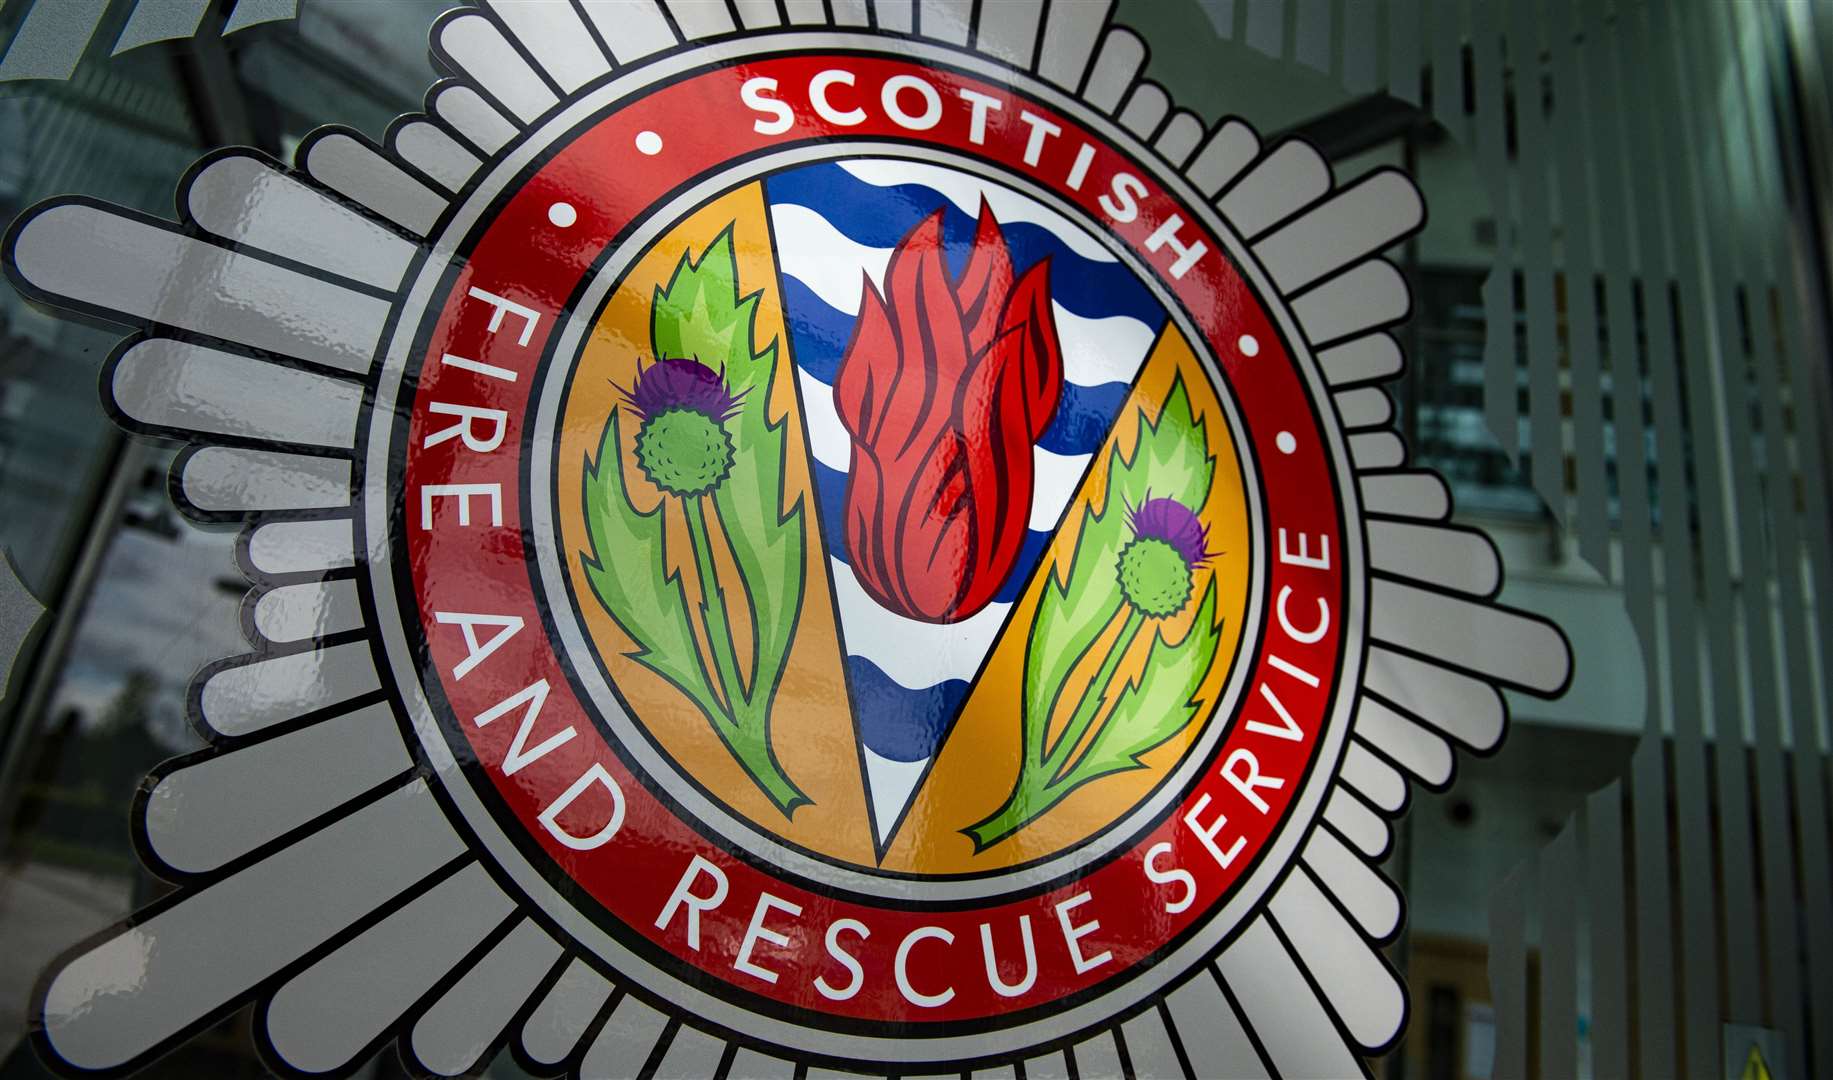 SFRS said there had been 'no immediate threat to the safety of the caller'.